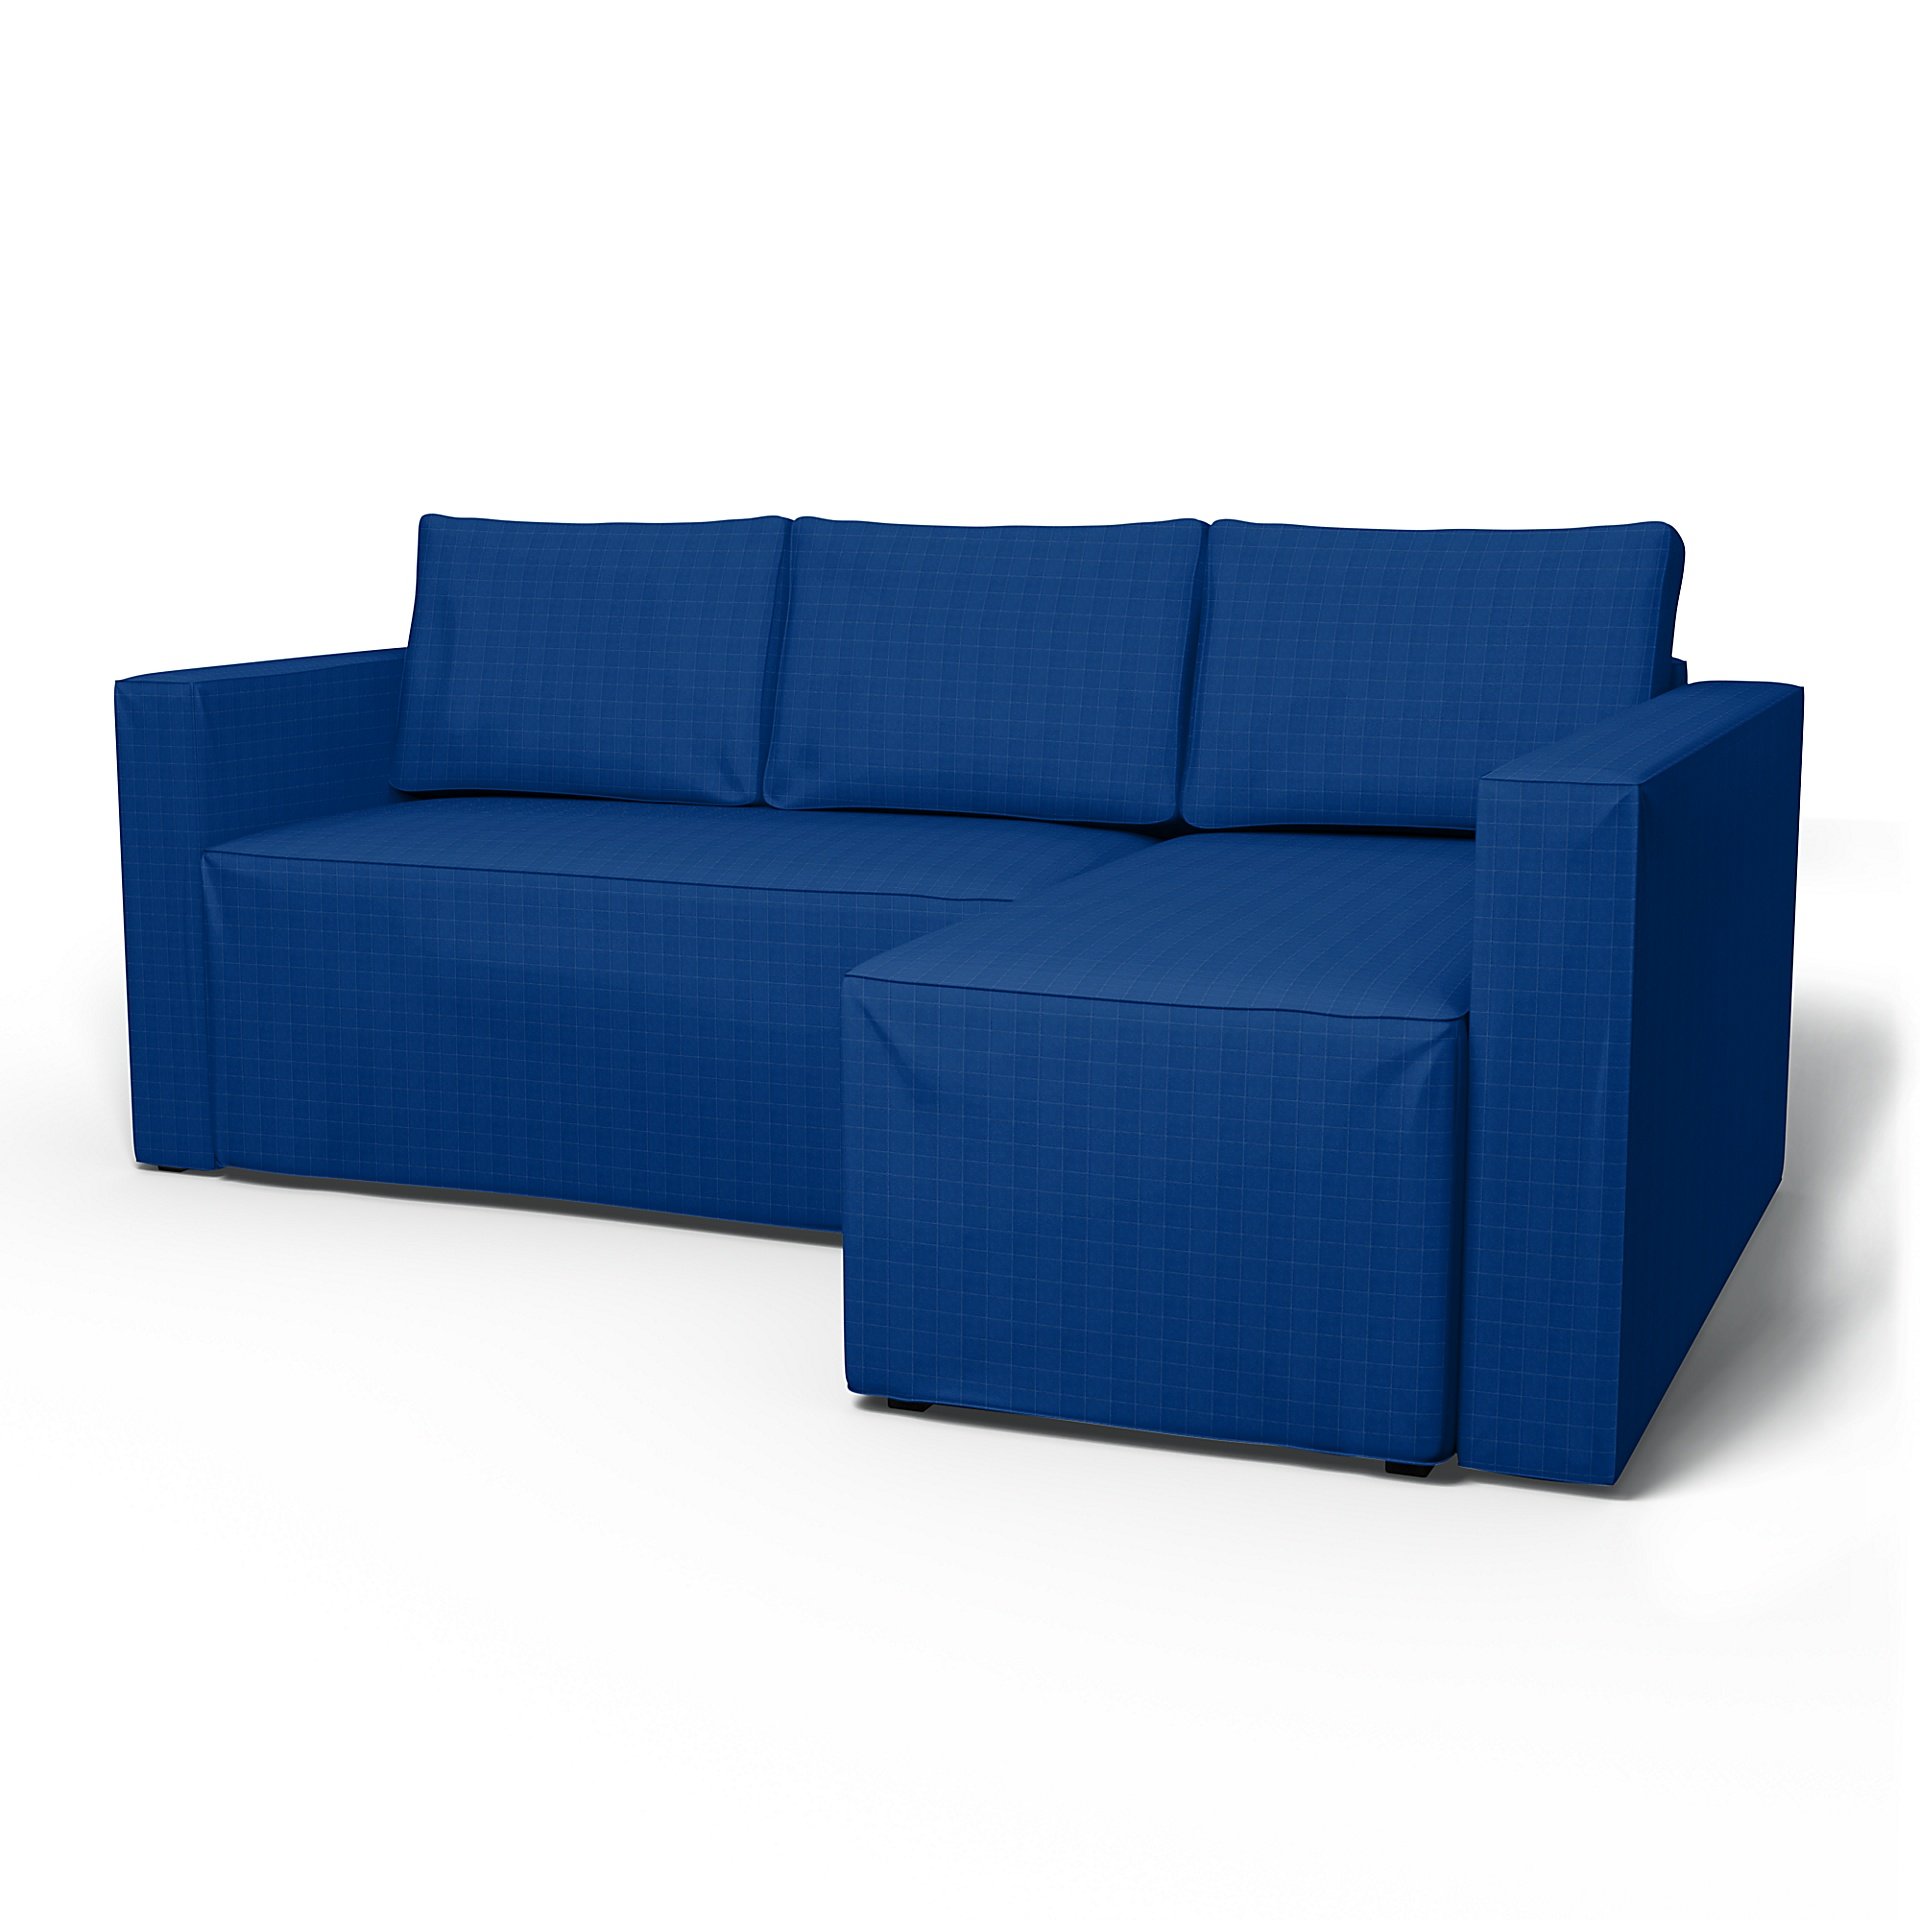 IKEA - Manstad Sofa Bed with Right Chaise Cover, Lapis Blue, Velvet - Bemz